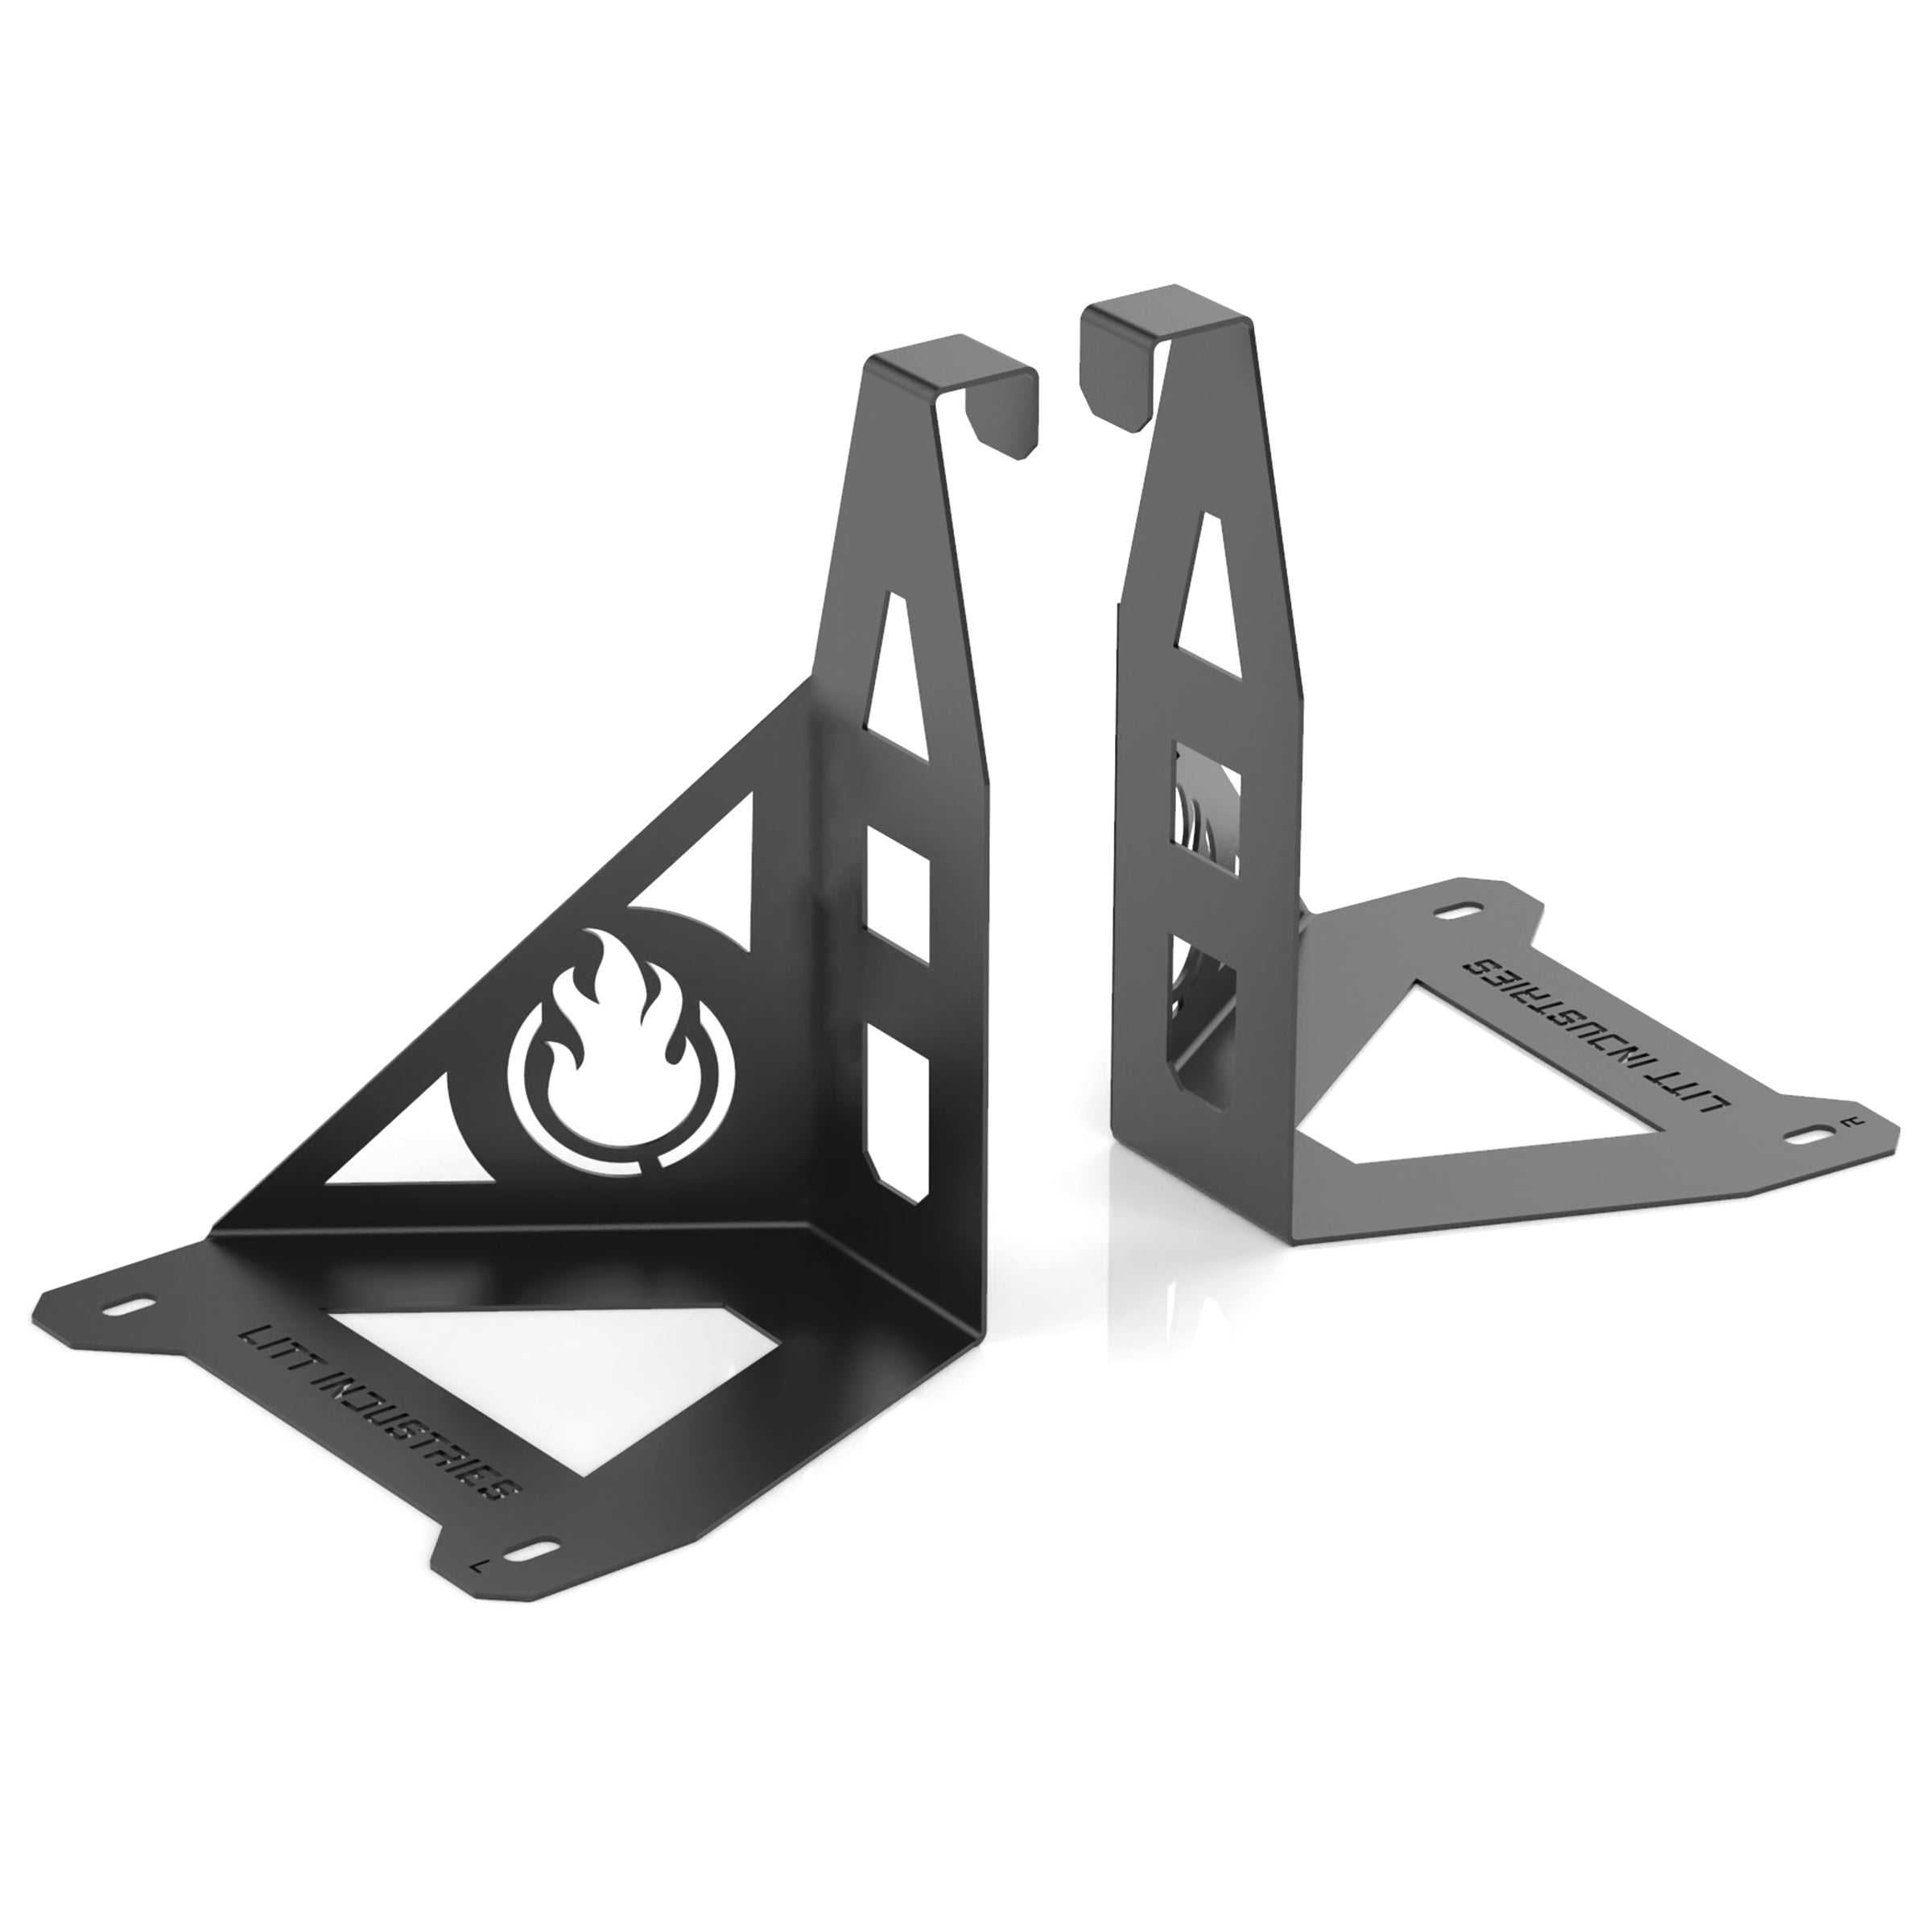 yeti 35qt tundra gusseted cooler mounts for polaris rzr 900 trail s or s1000 1000s models by Litt Industries